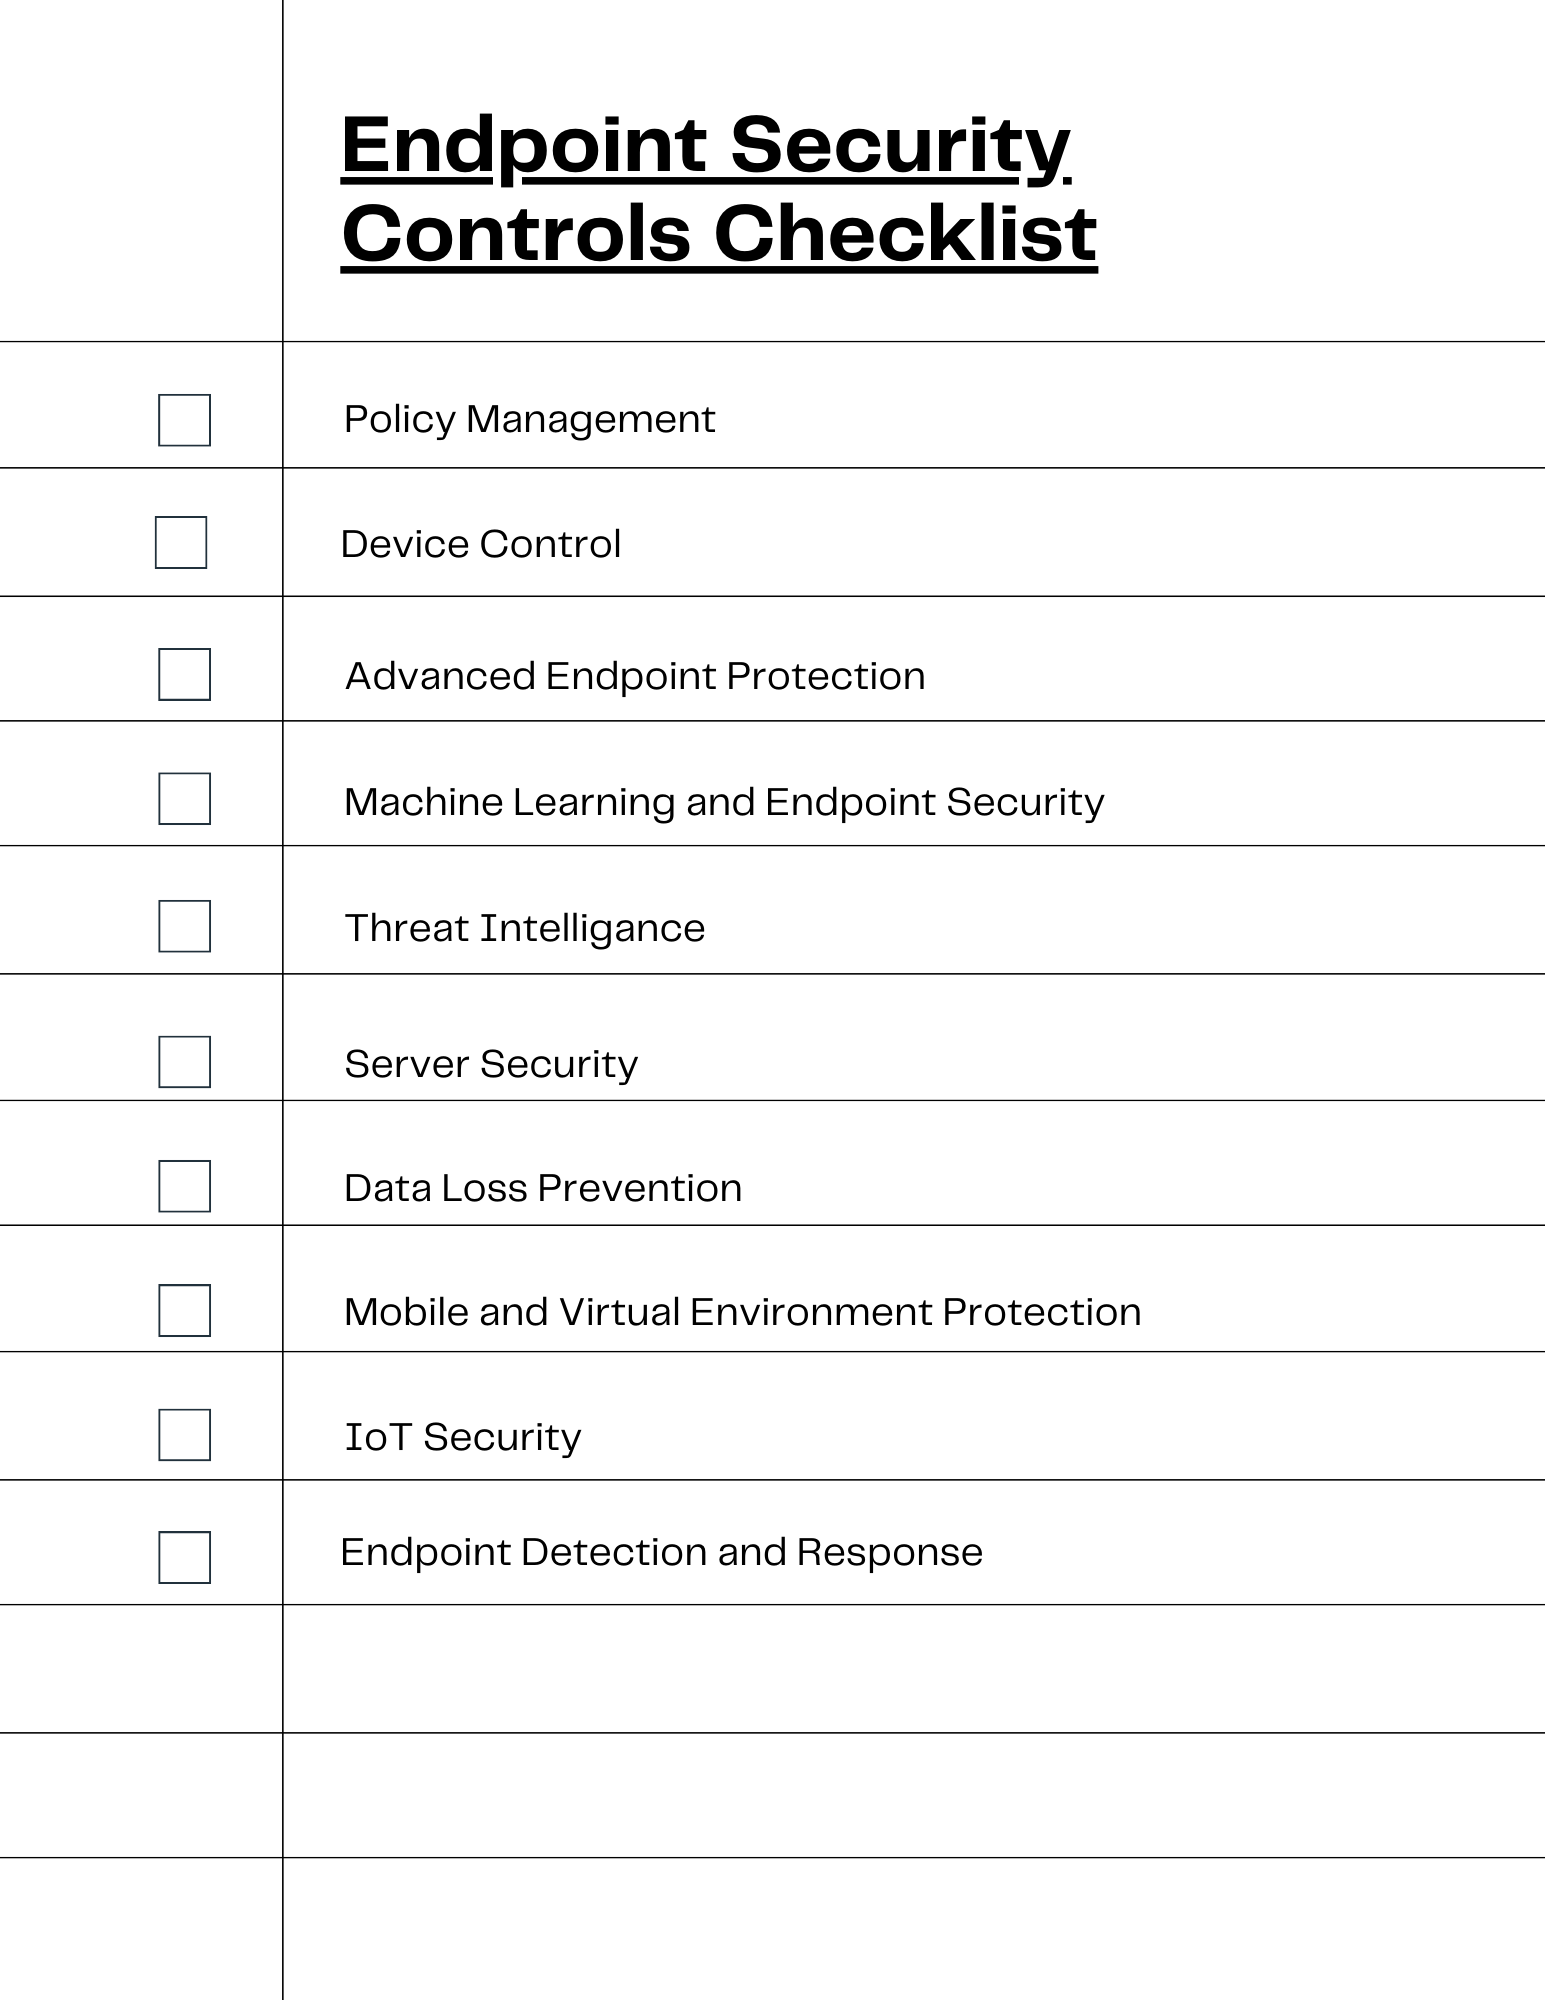 Endpoint Security Controls Checklist